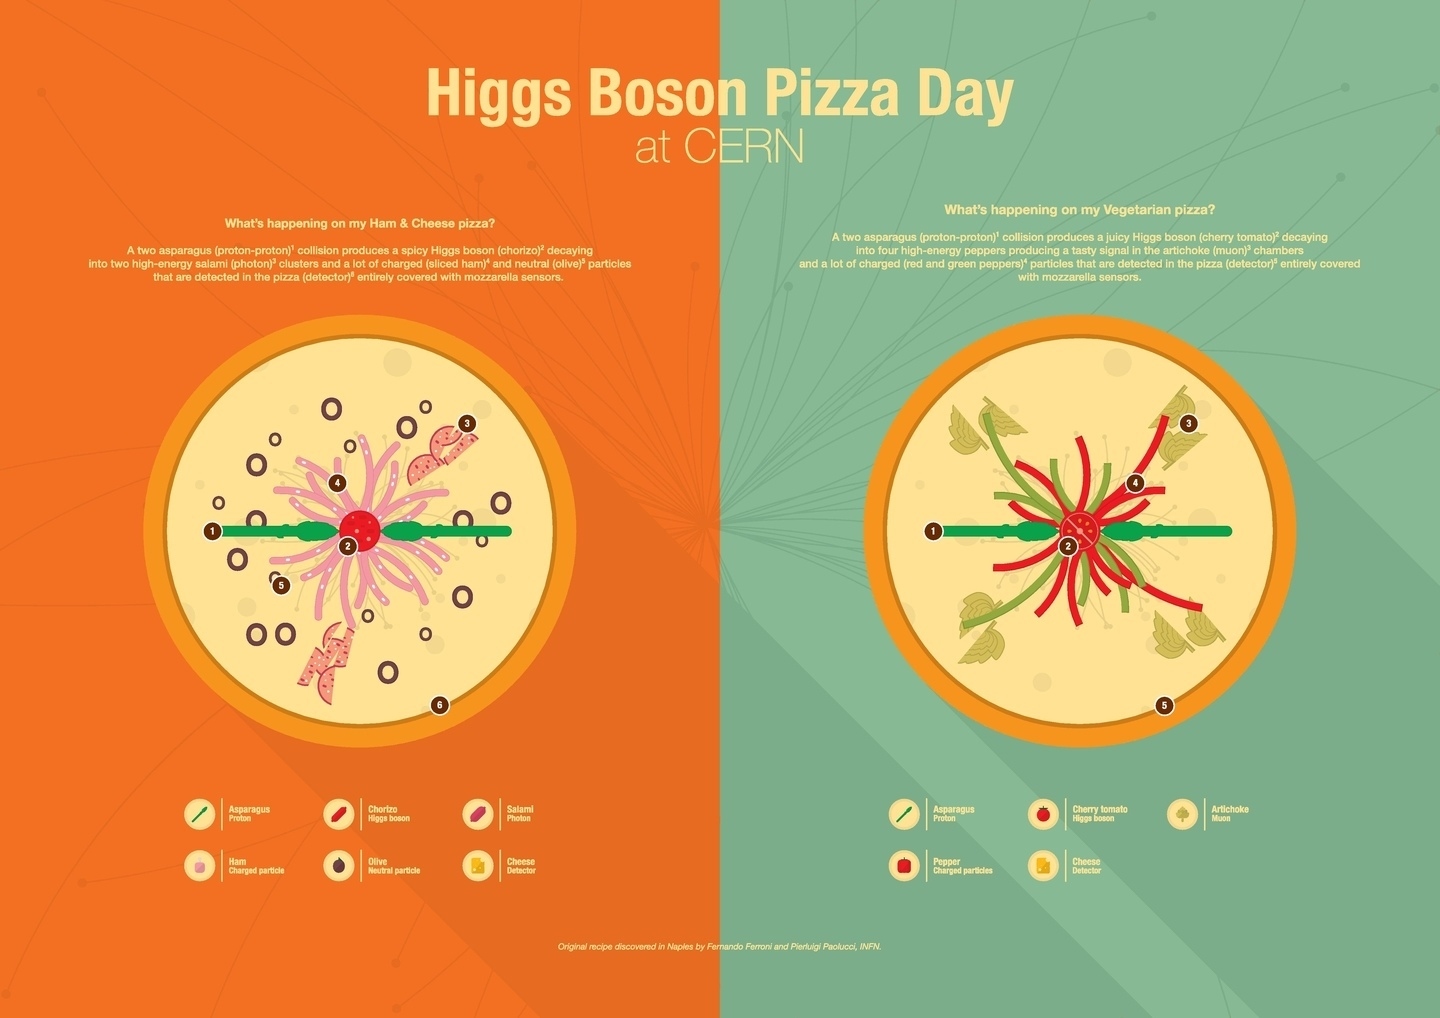 Make your own Higgs Boson pizza